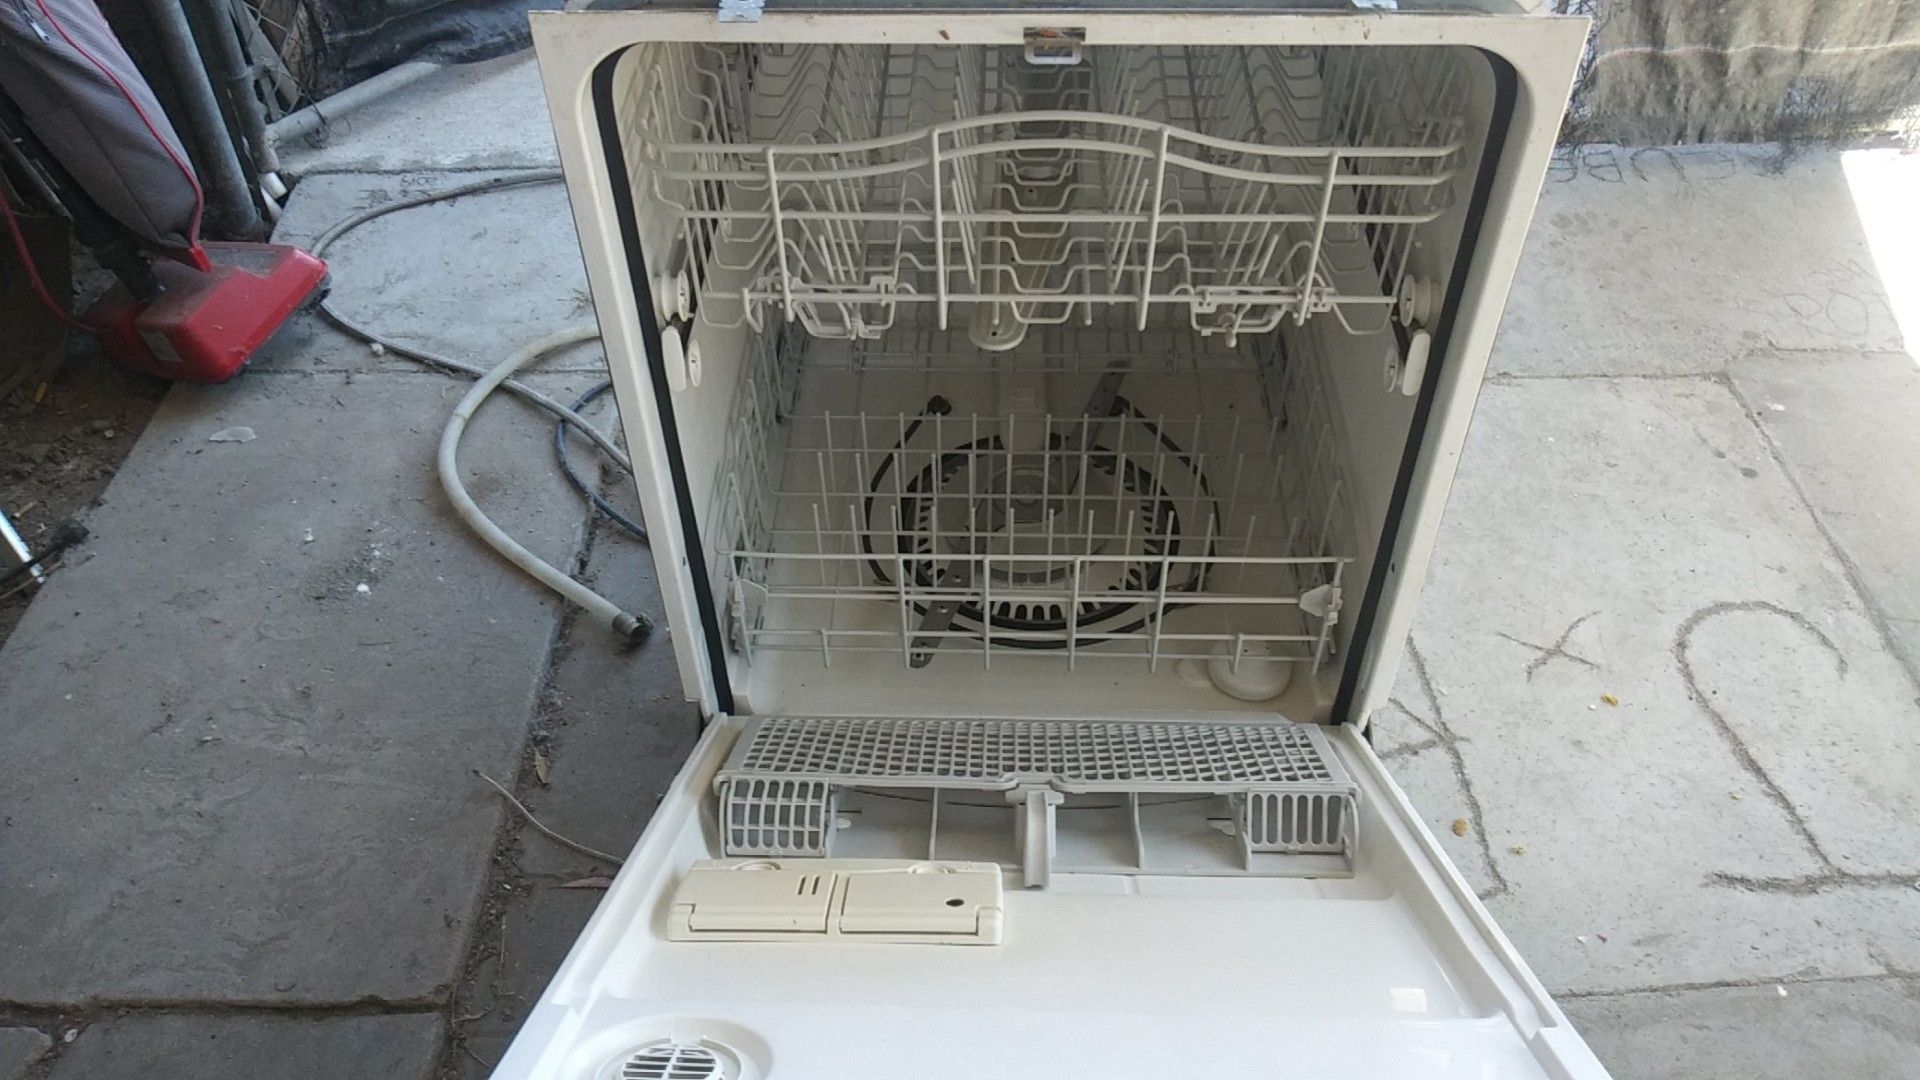 Dishwasher new never used it out of box